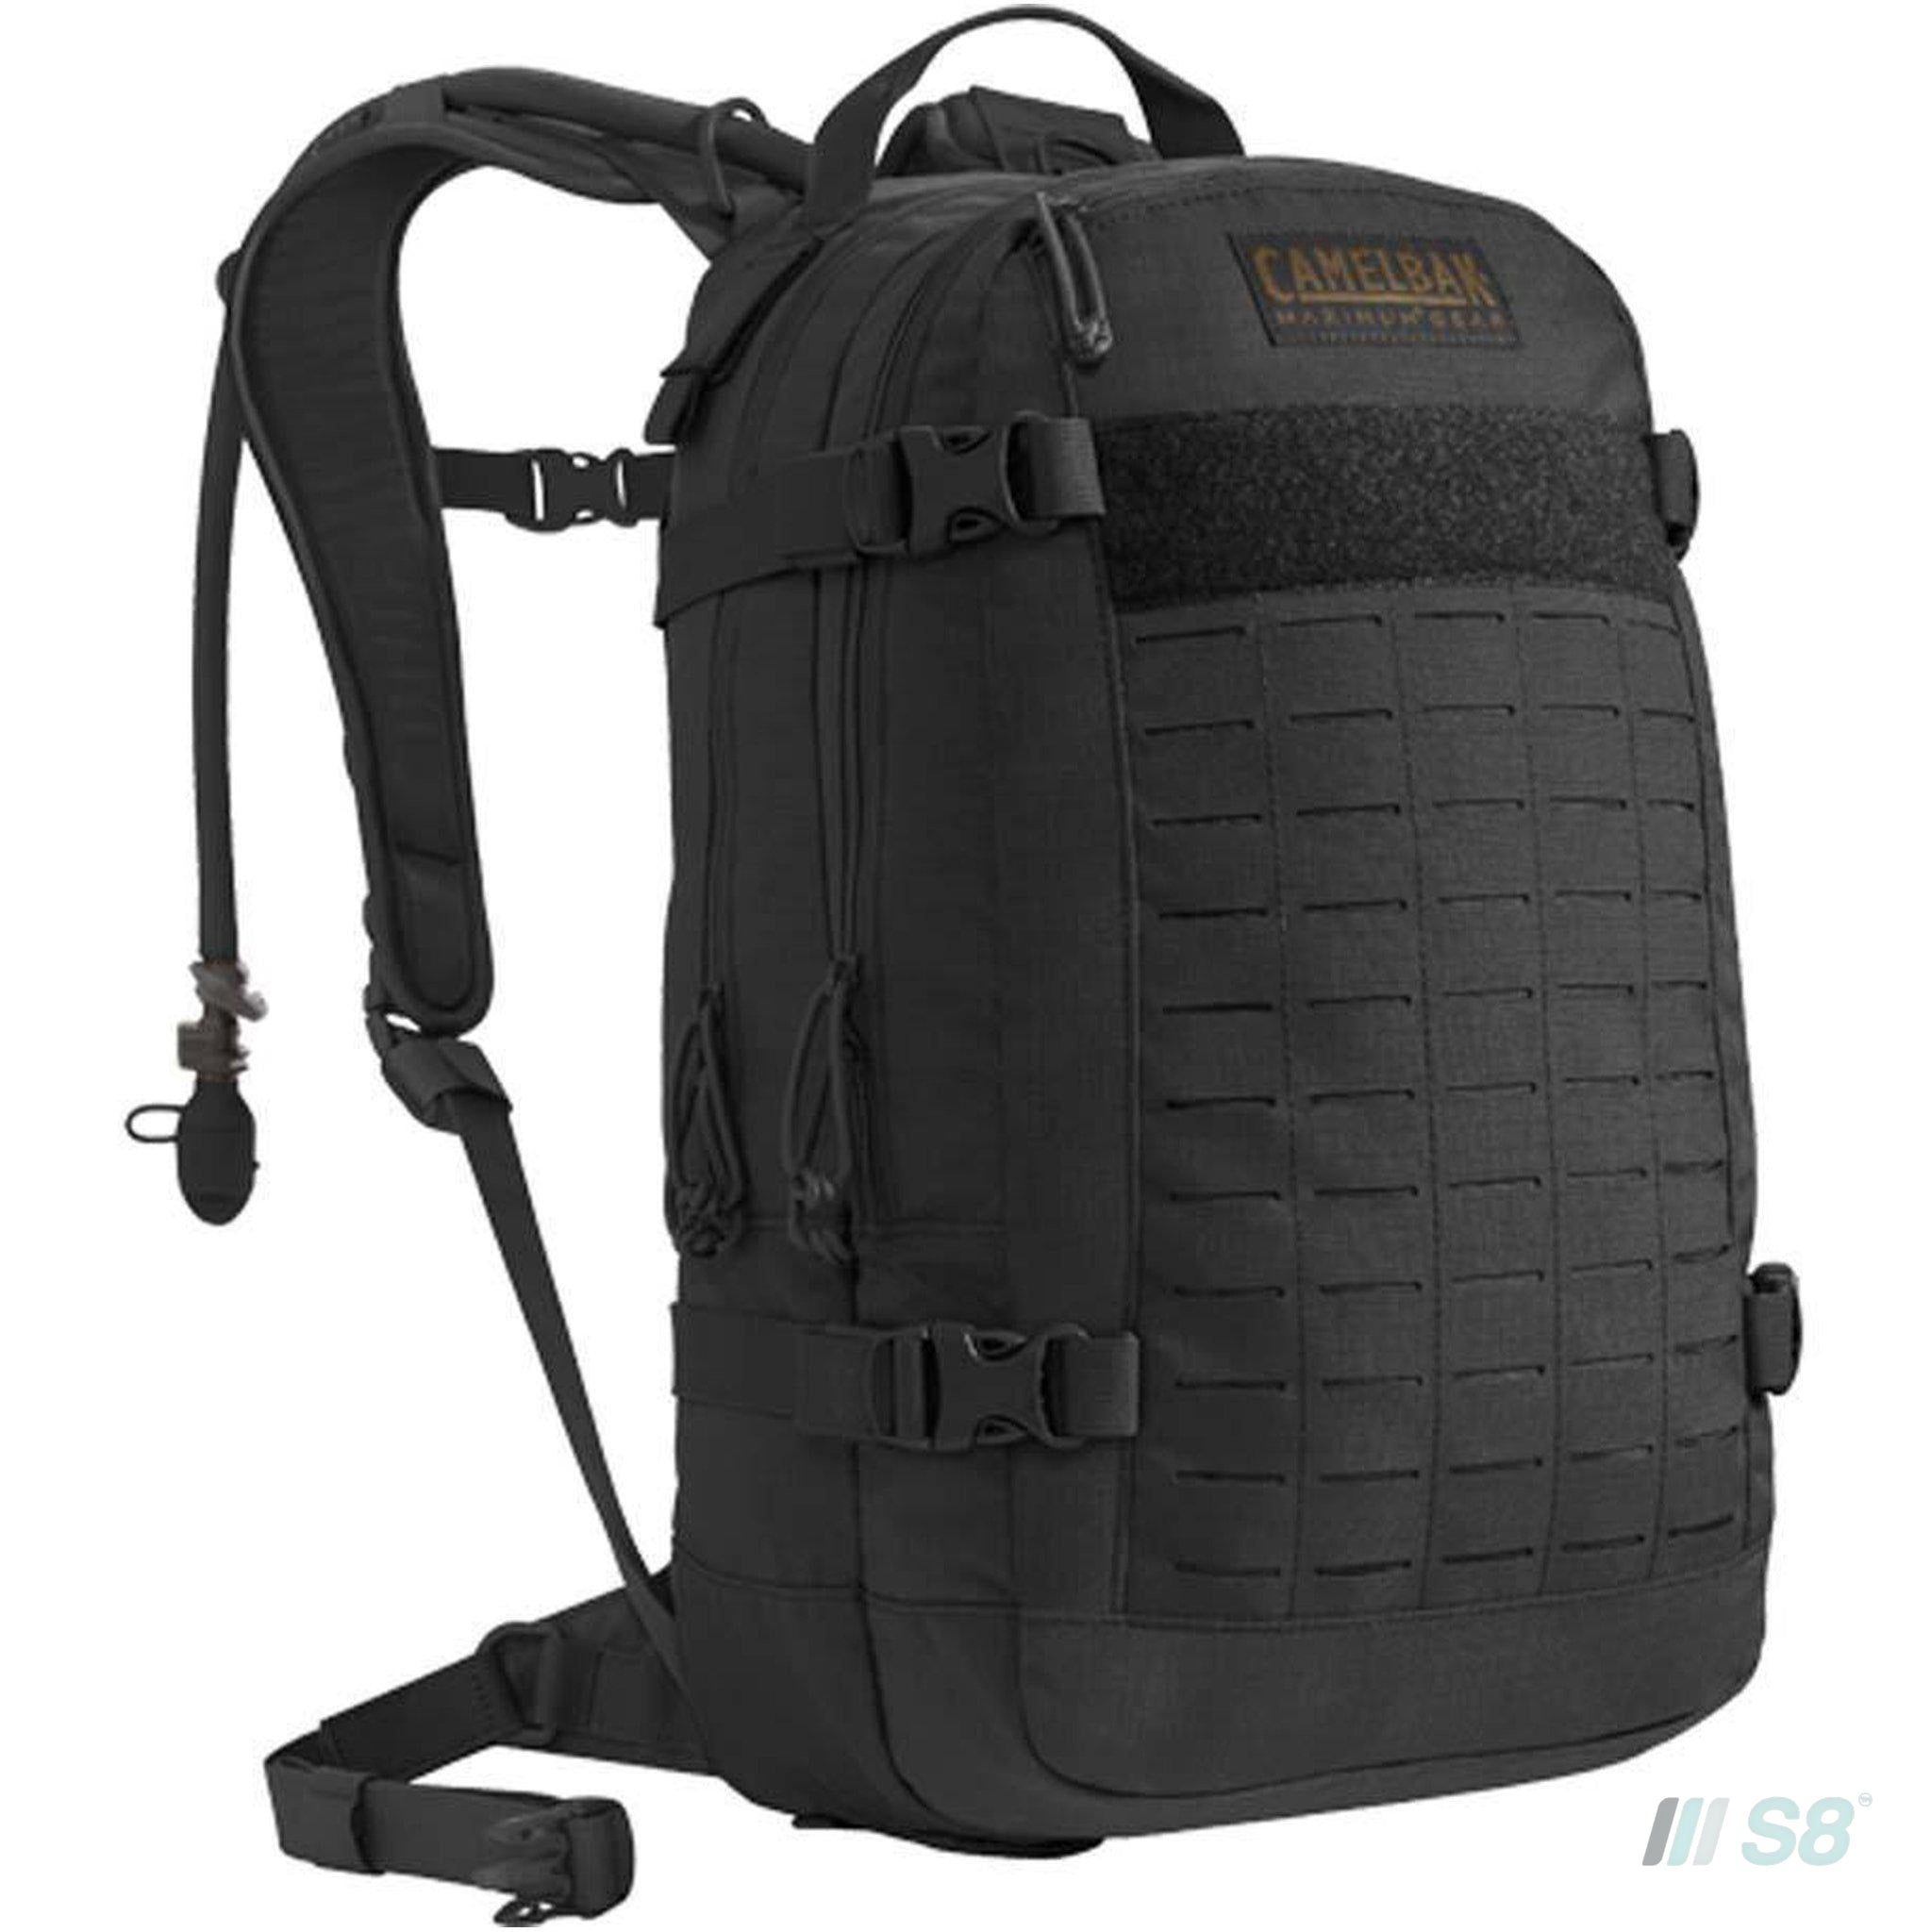 Camelbak Hawg 3L Military Hydration Backpack-Camelbak-S8 Products Group